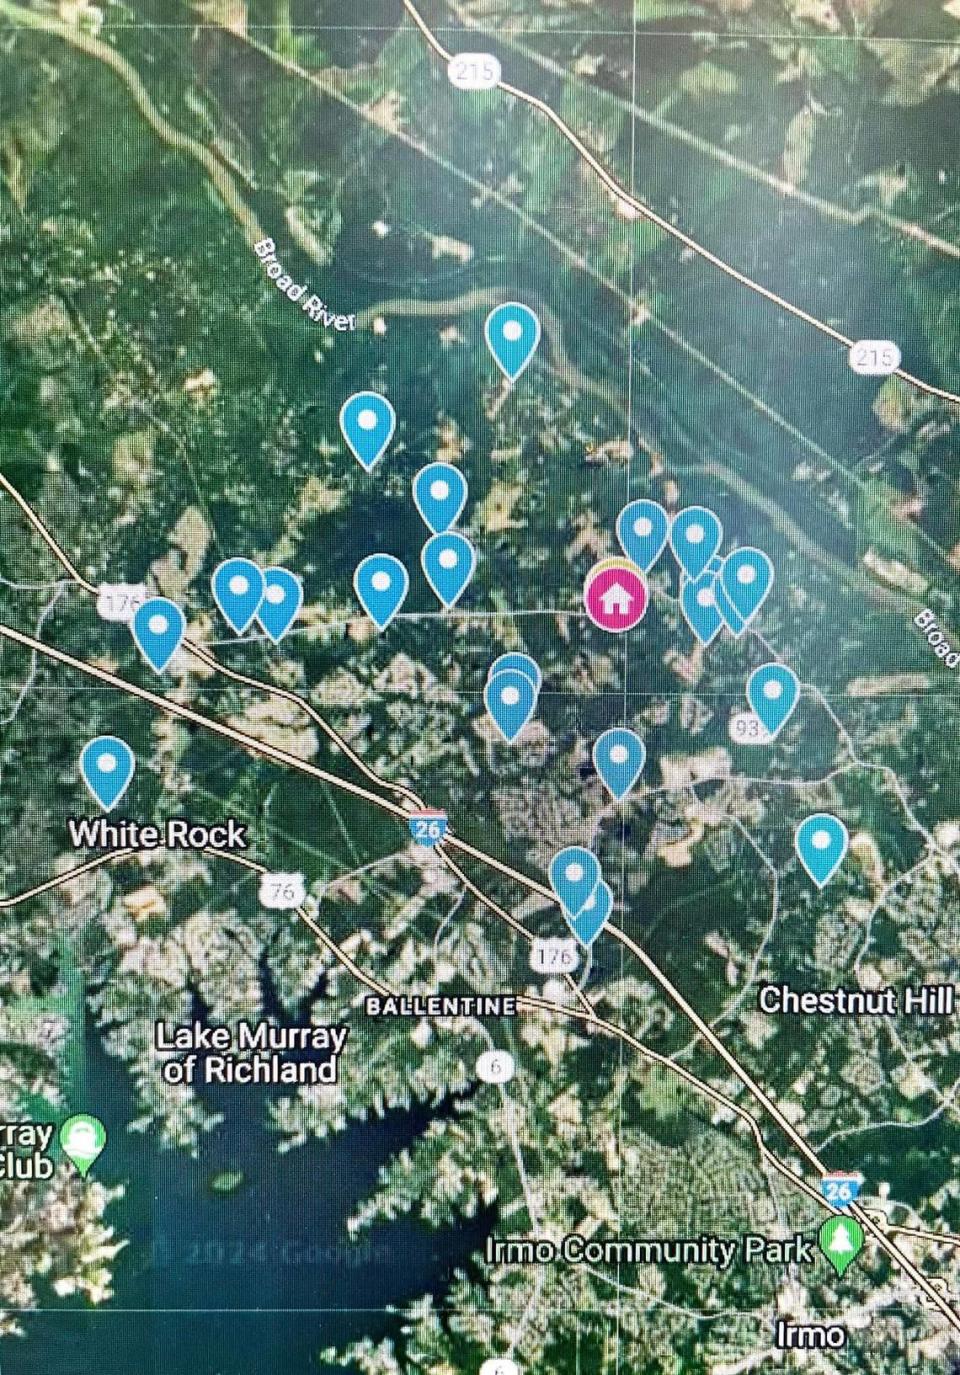 A map shows the locations of burglaries, according to the Richland County Sheriff’s Department.